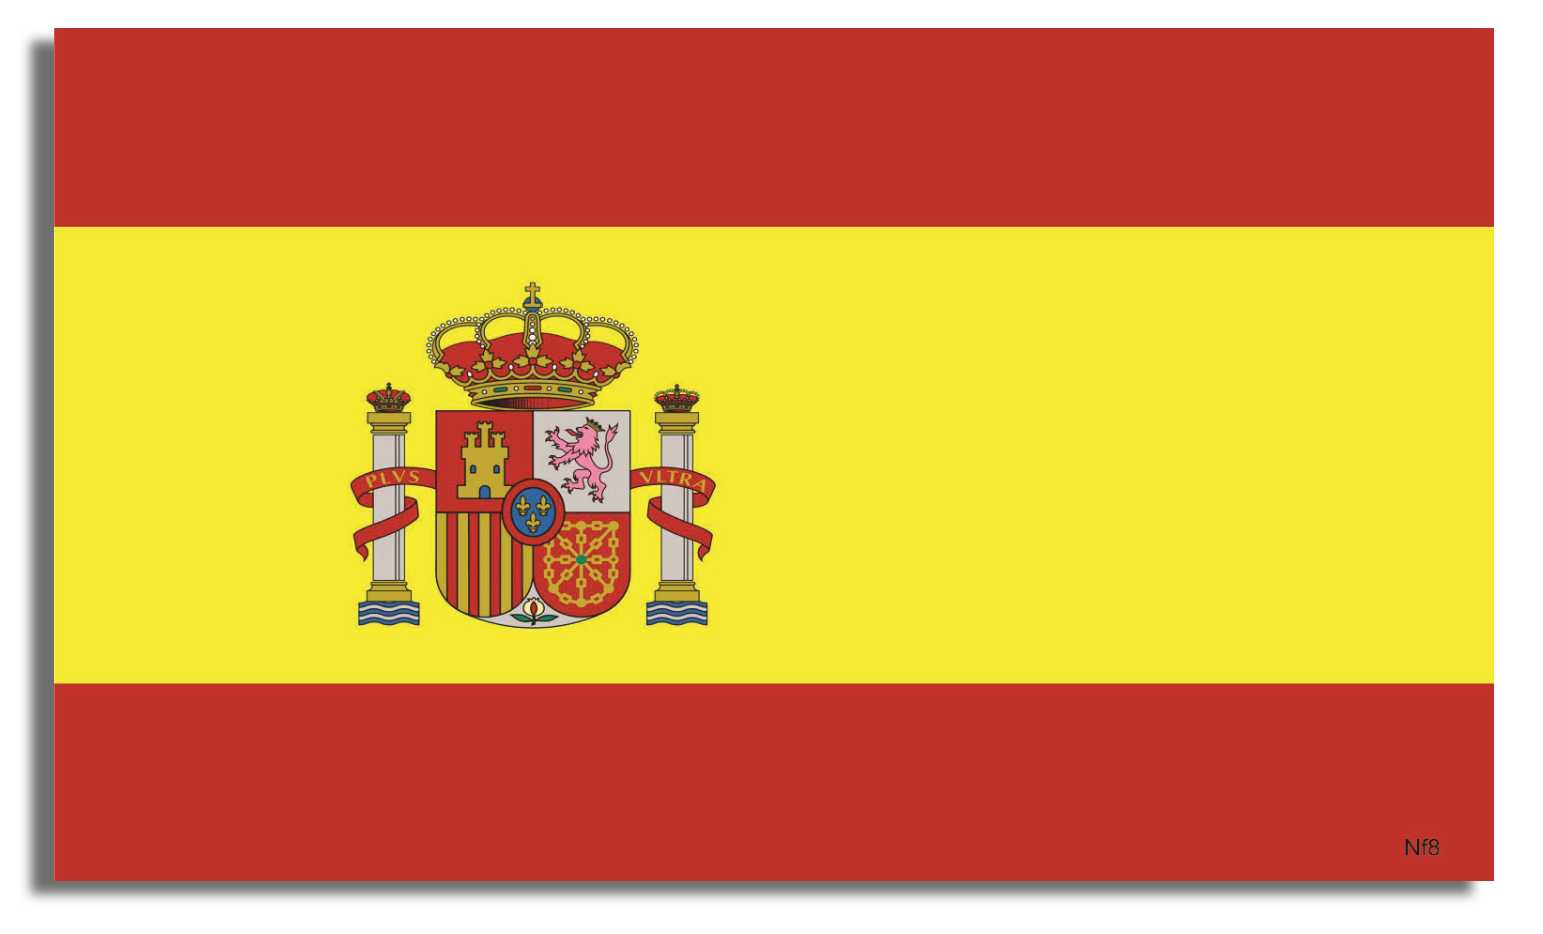 Spanish Flag - 3.5" x 5" -  Decal Bumper Sticker-national Bumper Sticker Car Magnet Spanish Flag-  Decal for carsamerican flag, anti war, international flags, patriot, patriotic, peace, protest war, stars and stripes